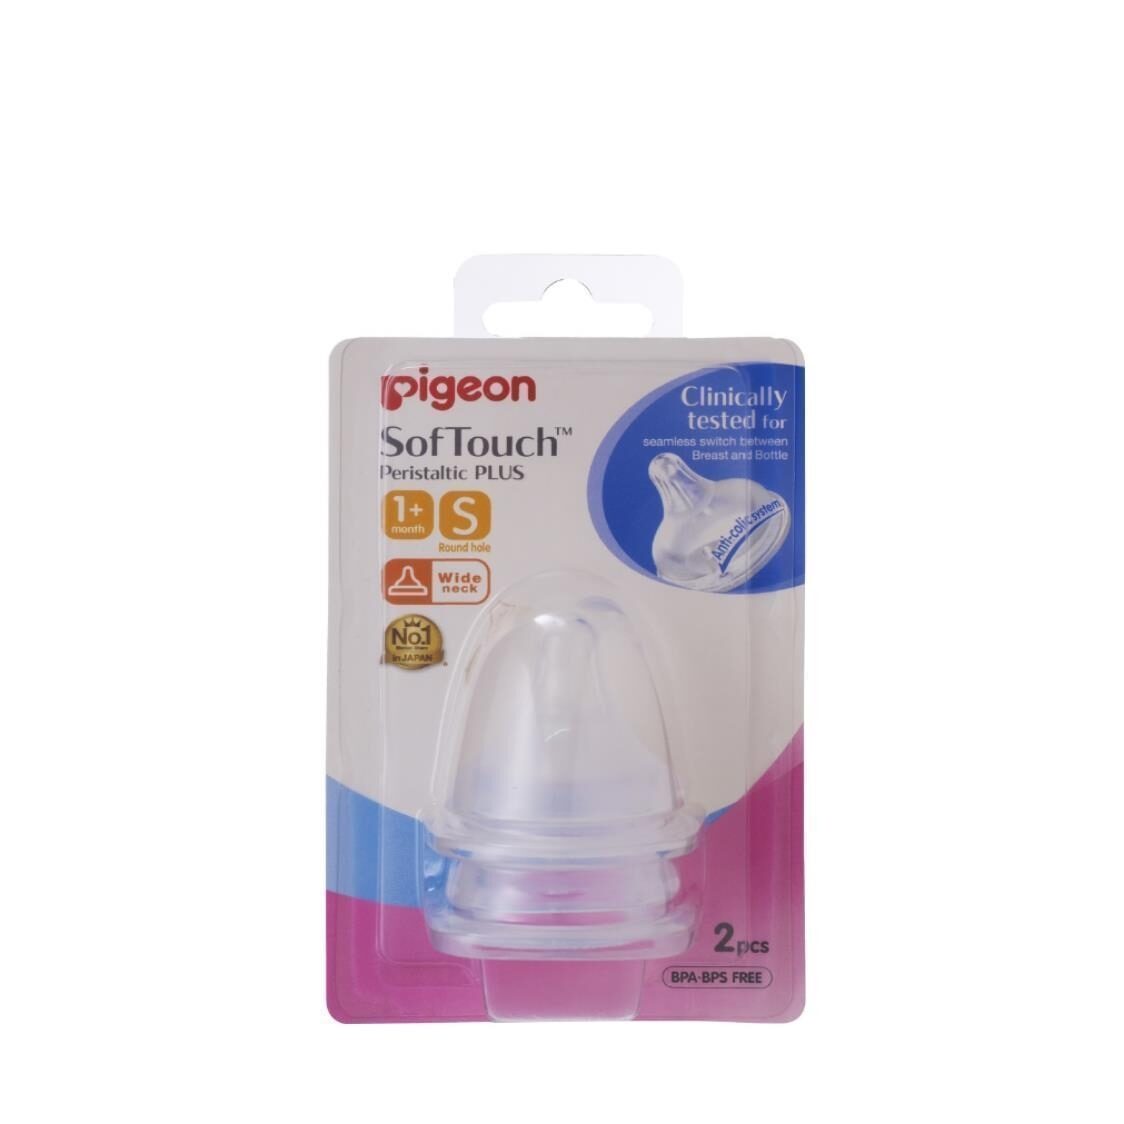 Pigeon Softouch Peristaltic Plus Nipple S